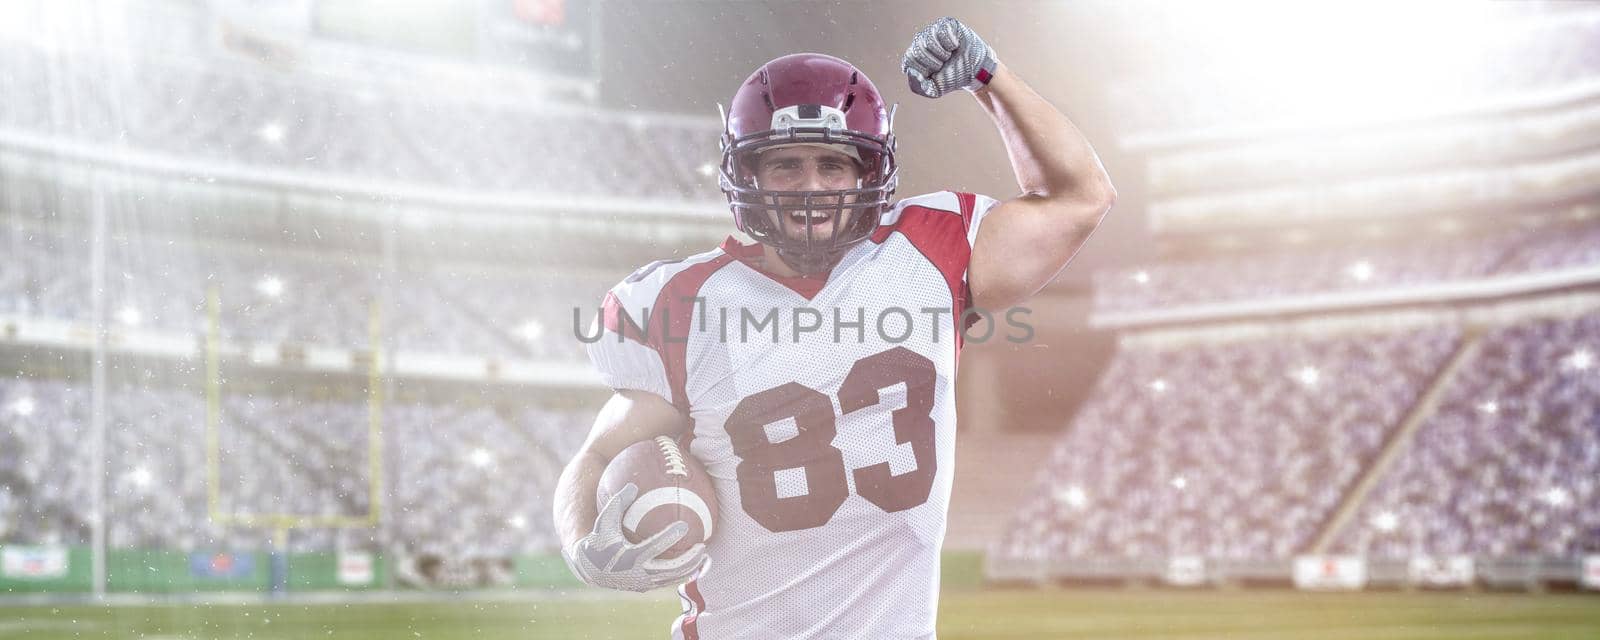 american football player celebrating touchdown on big modern stadium field with lights and flares